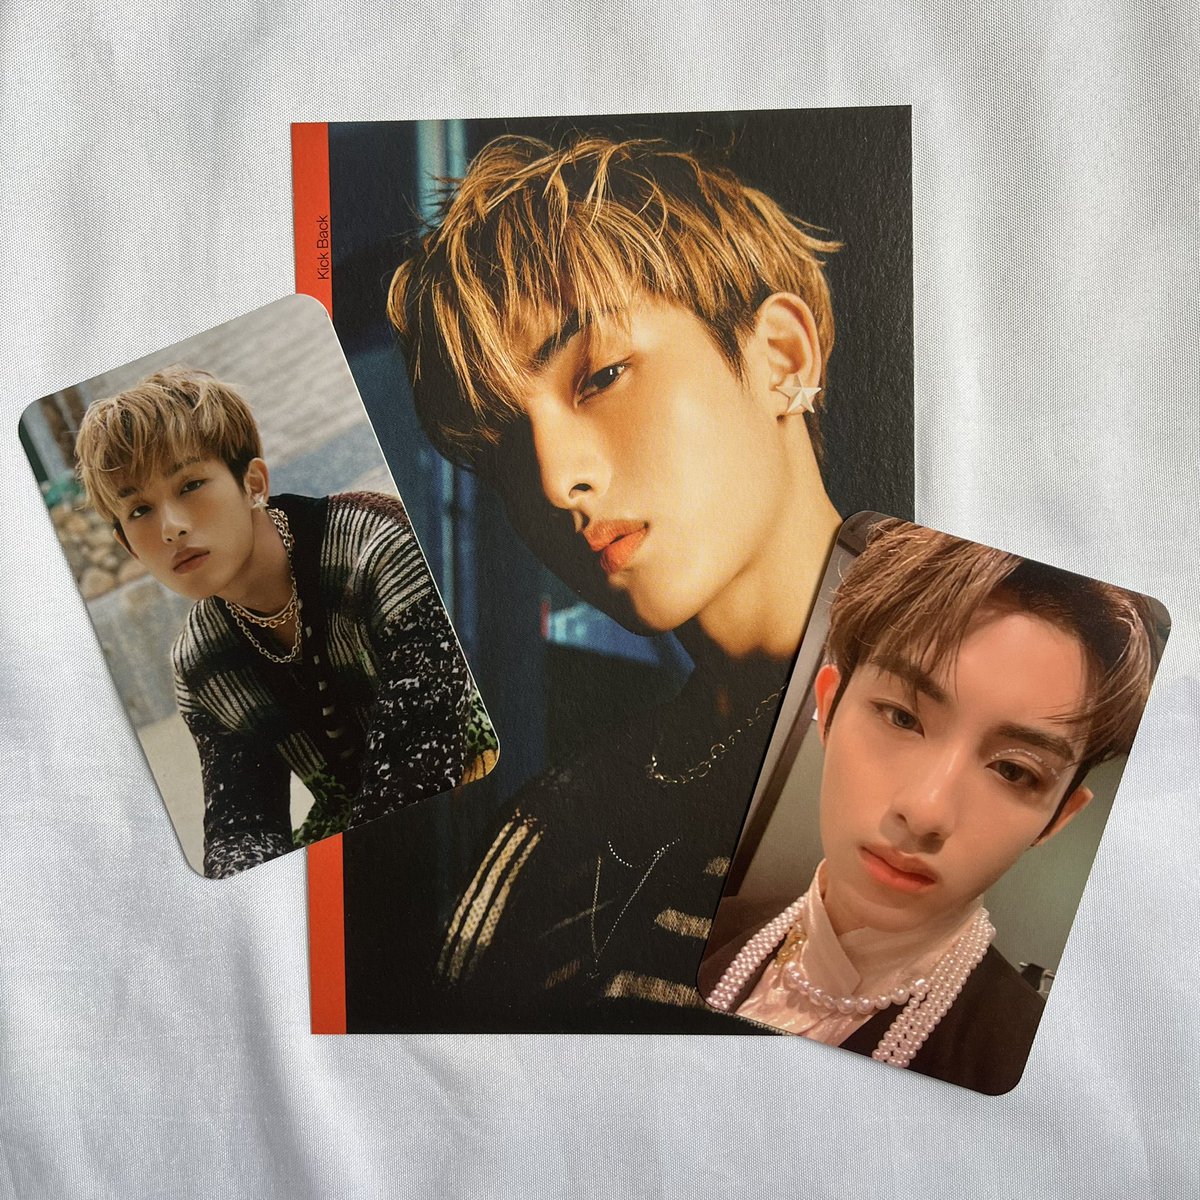 [Open Worldwide] Winwin Birthday giveaways 🥳 ☁️ Followers only ☁️ Like and retweets this tweet 🎁 2 photocard + 1 postcard + 1 Winwin Birthday Initial ring (1 winner only) End on 4 NOV 2022, 6PM KST